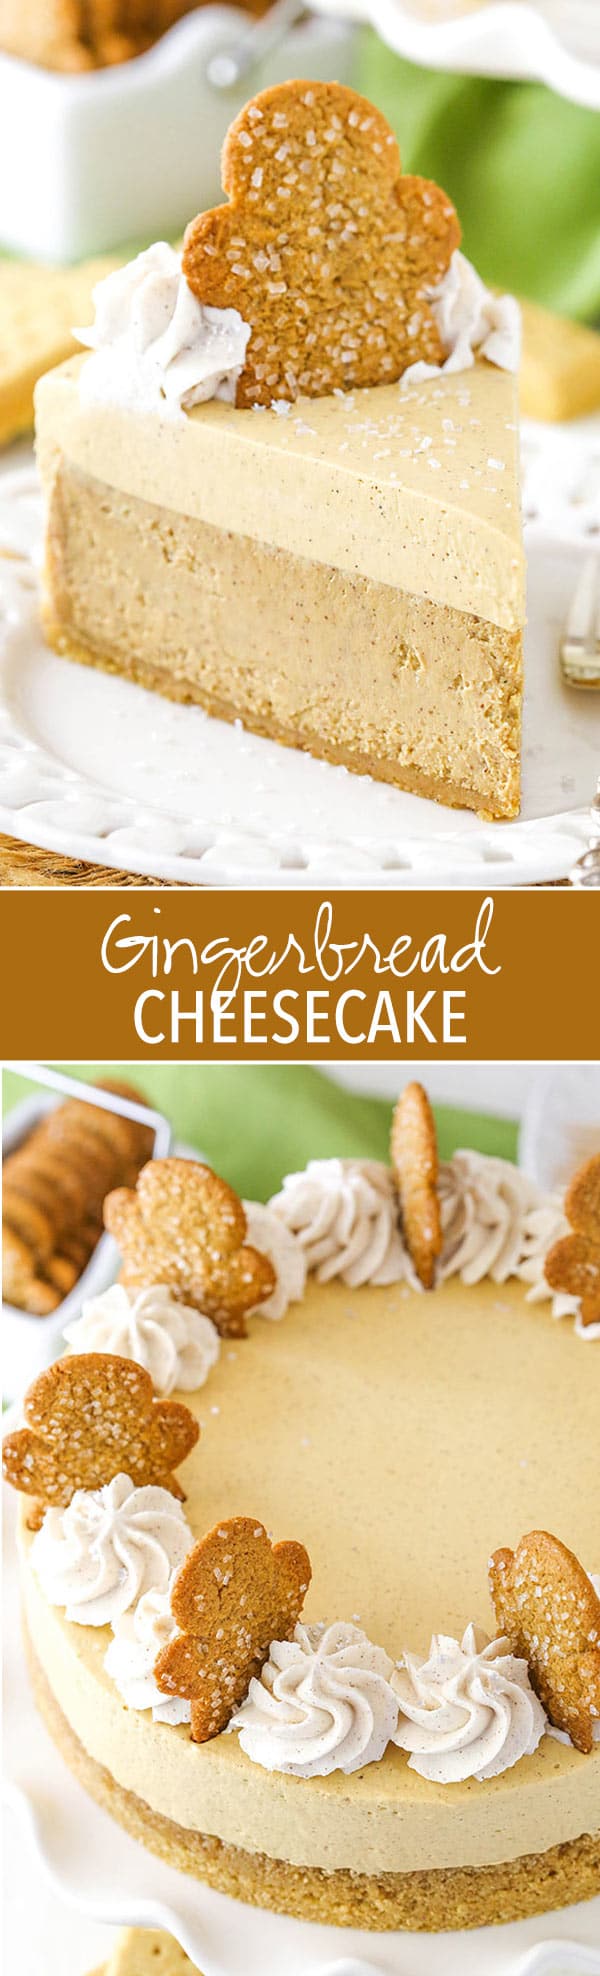 Gingerbread Cheesecake - A great holiday dessert, full of flavor and spices!